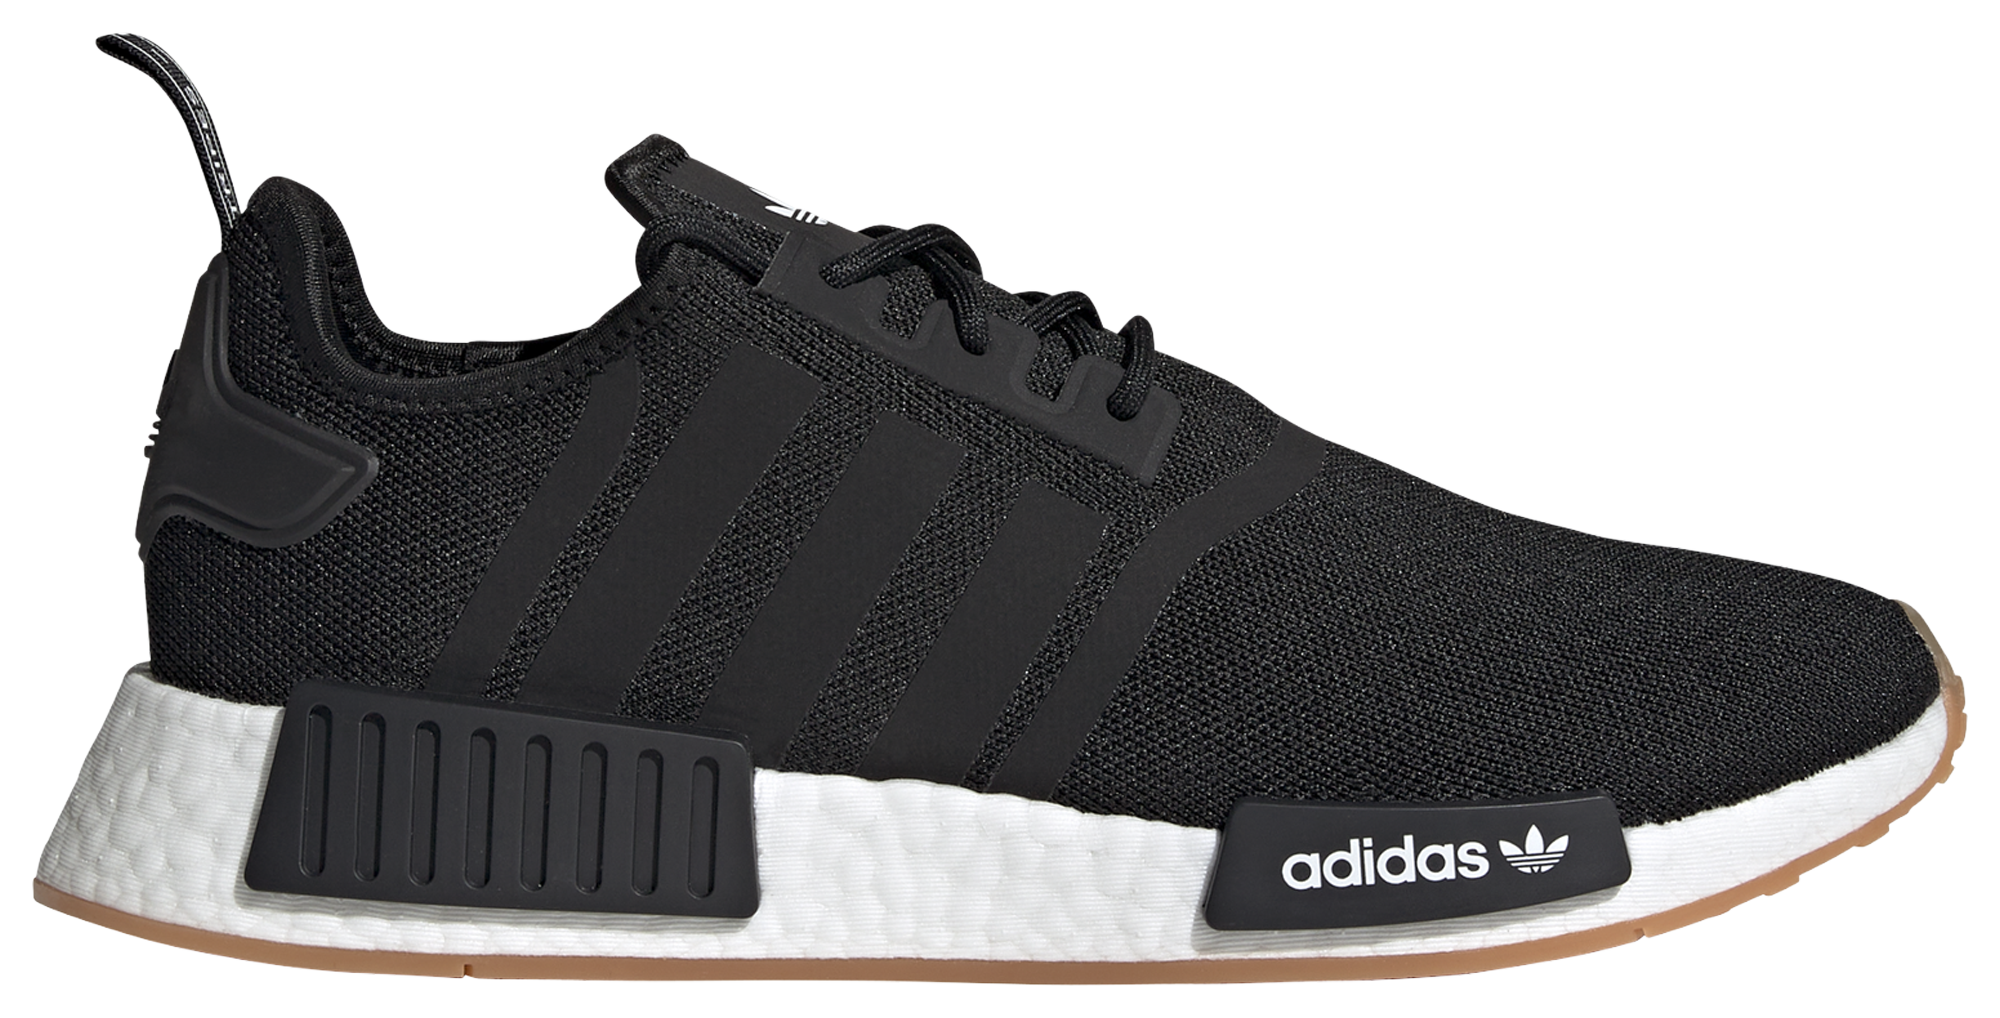 black and teal nmd